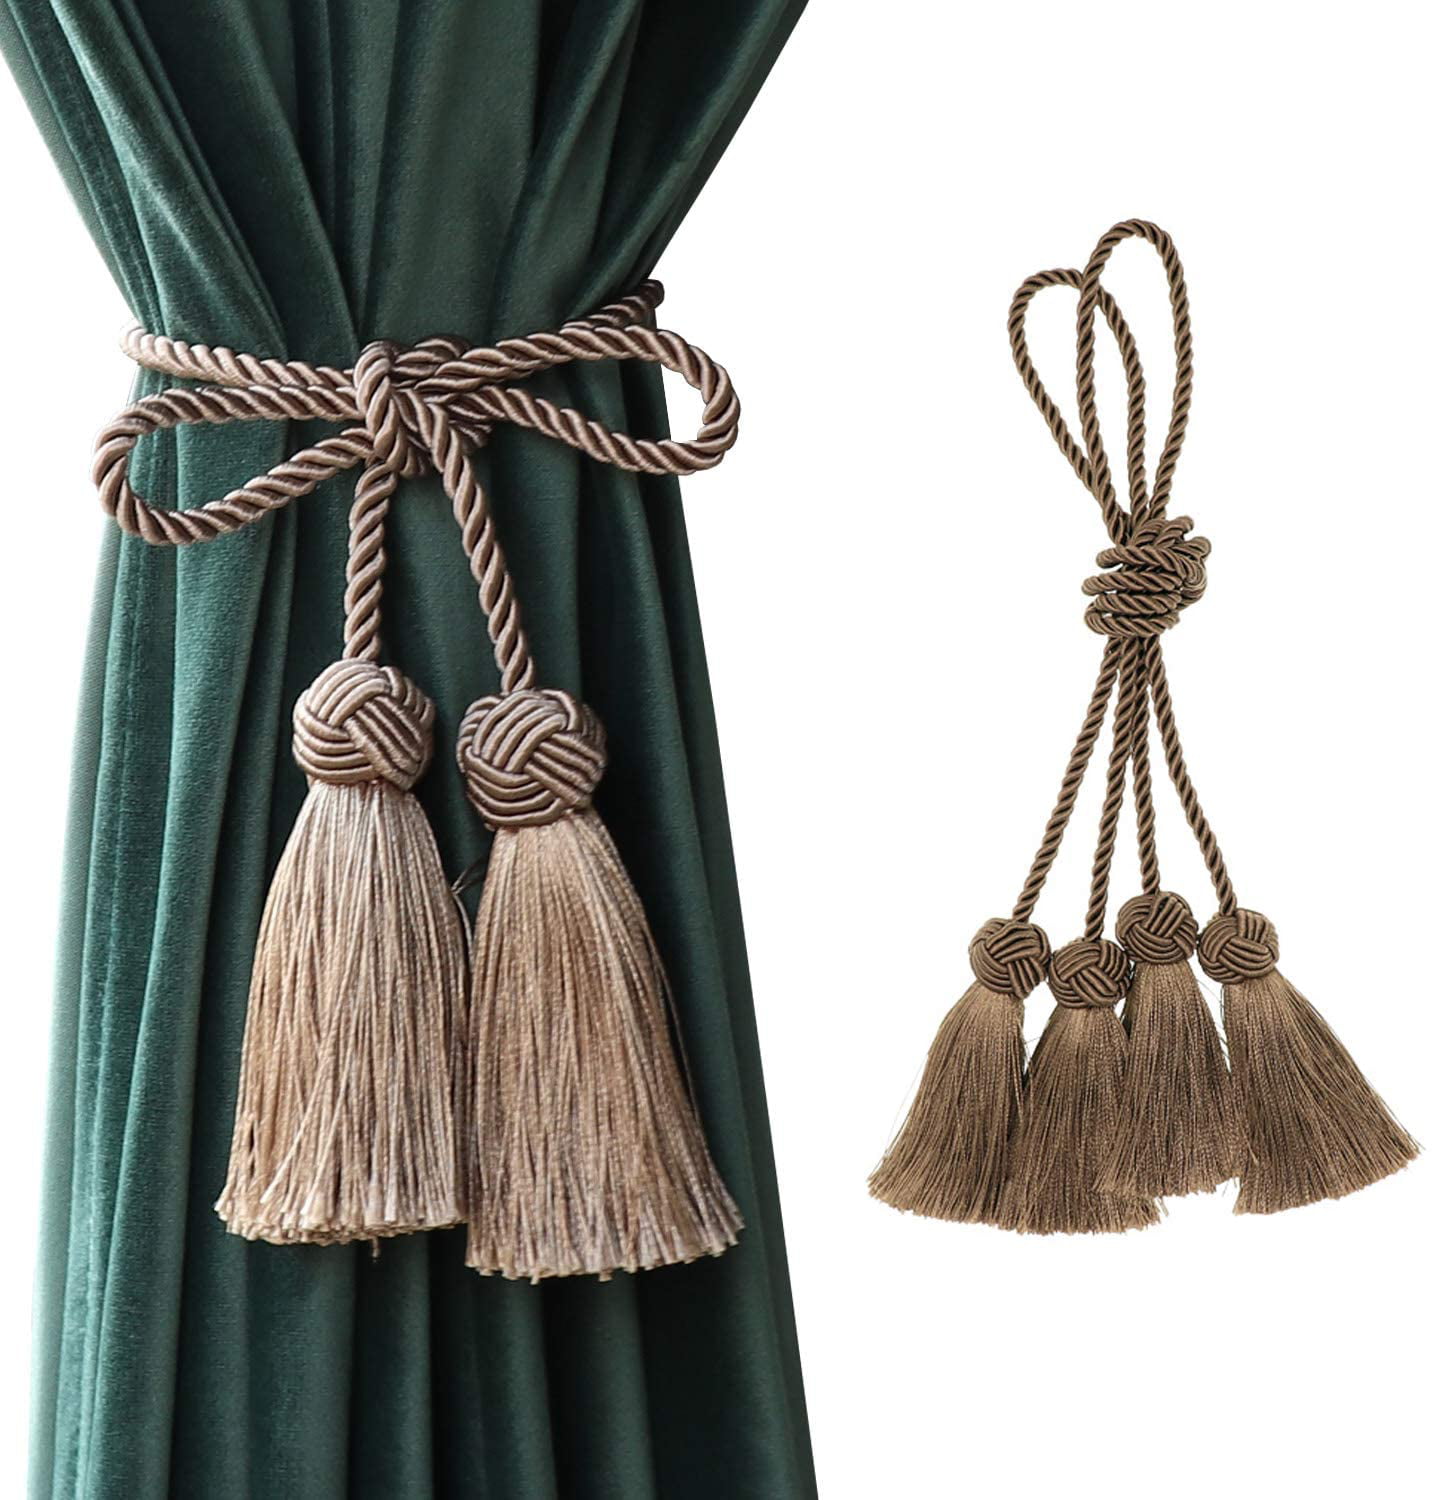 Details about   Curtain gold tassels tie rope 